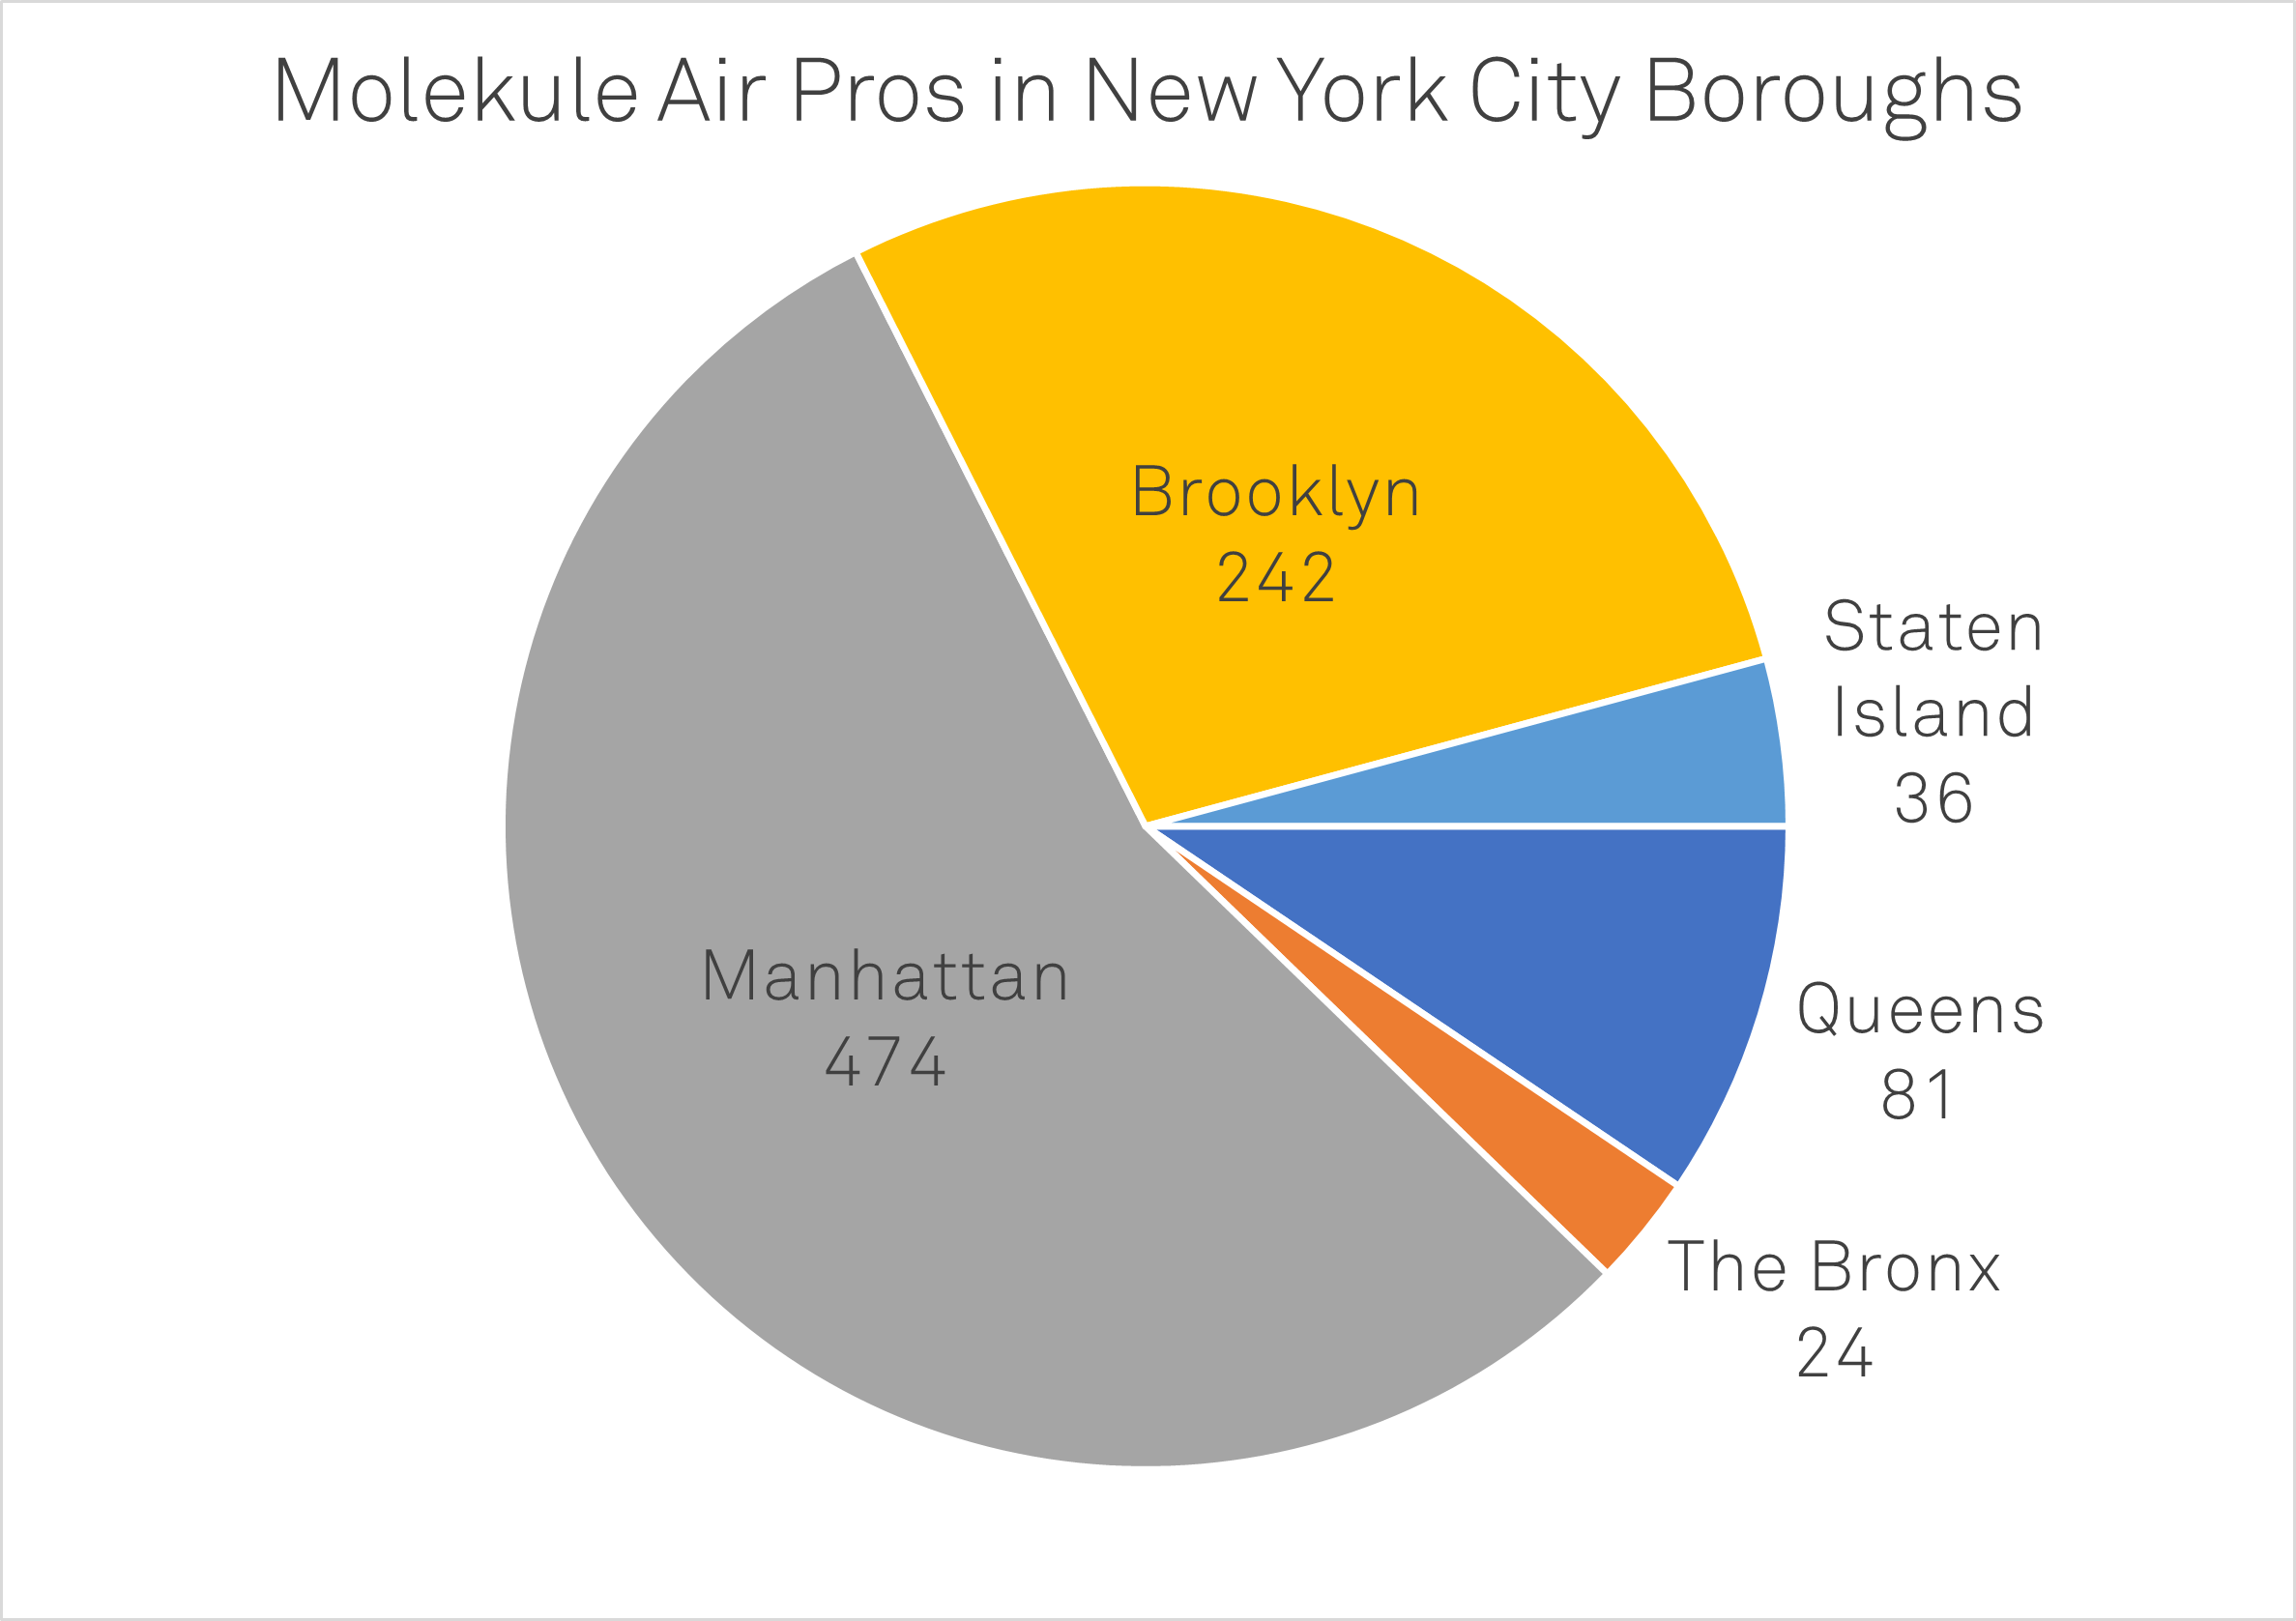 A pie chart showing the number of Molekule Air Pros in each of New York City's 5 boroughs